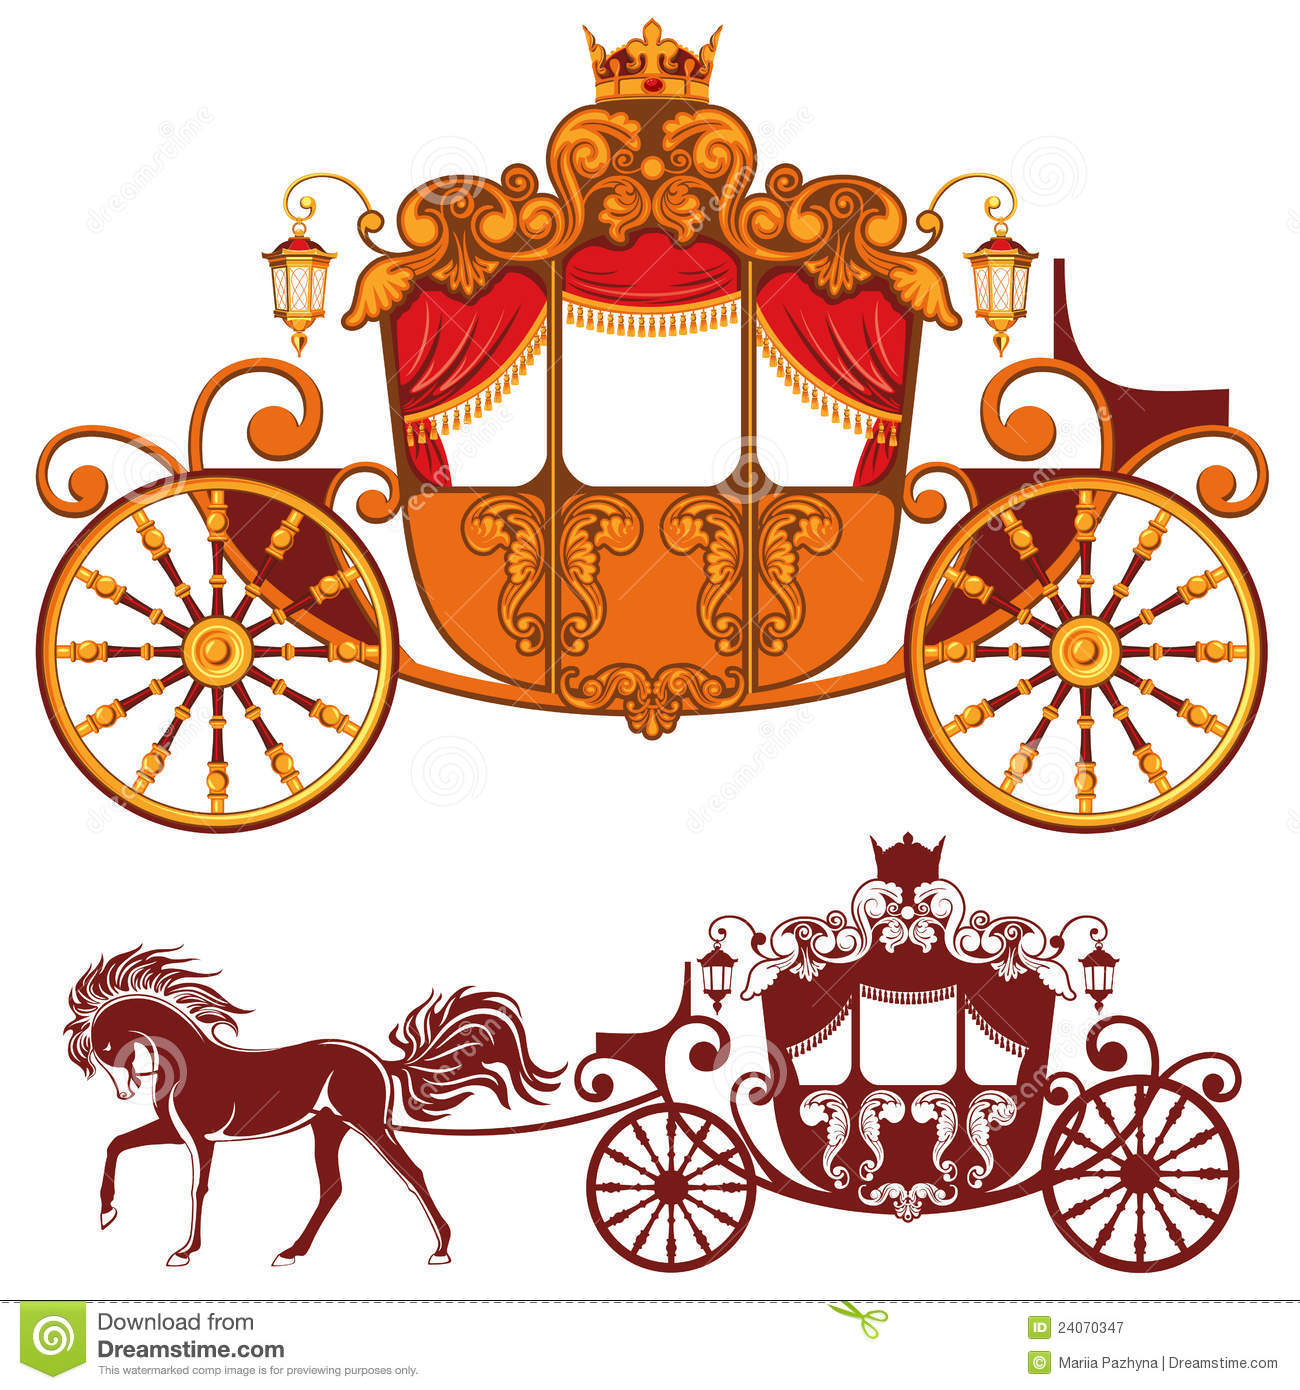 Royal Carriage Royalty Free Stock Photography   Image  24070347